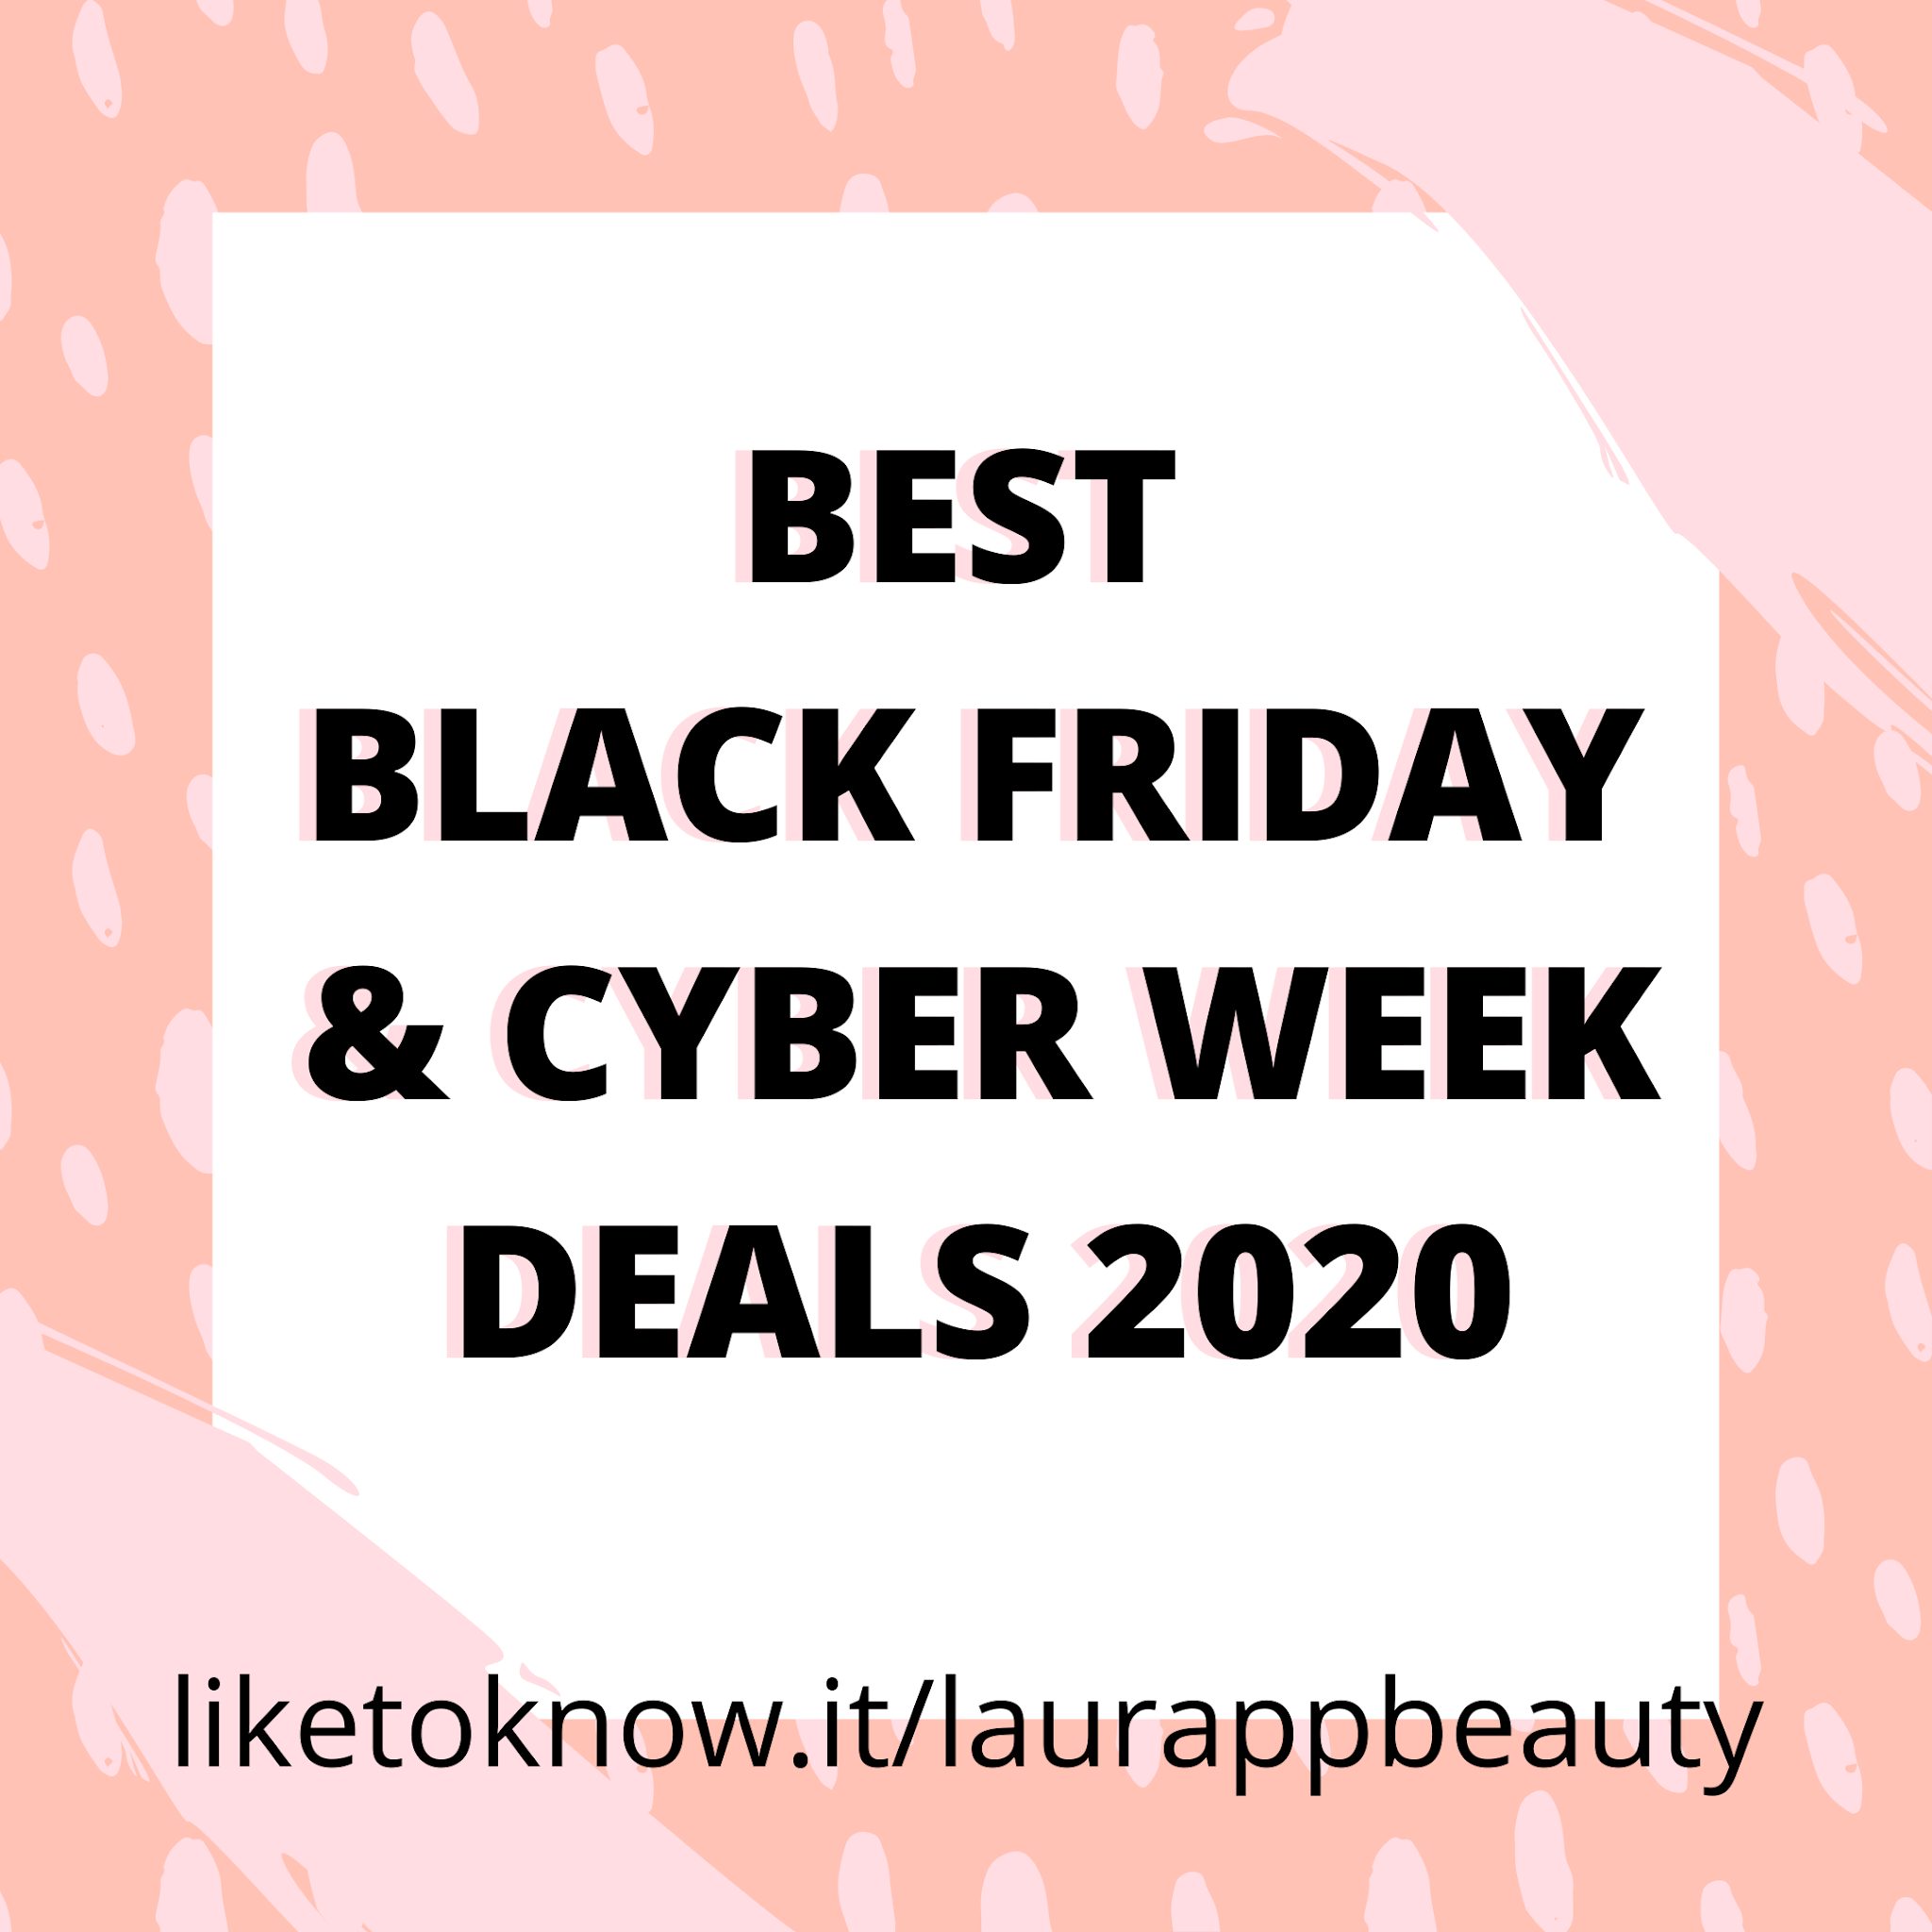 Black Friday Deals - Best Fashion, Beauty, and Home Sales